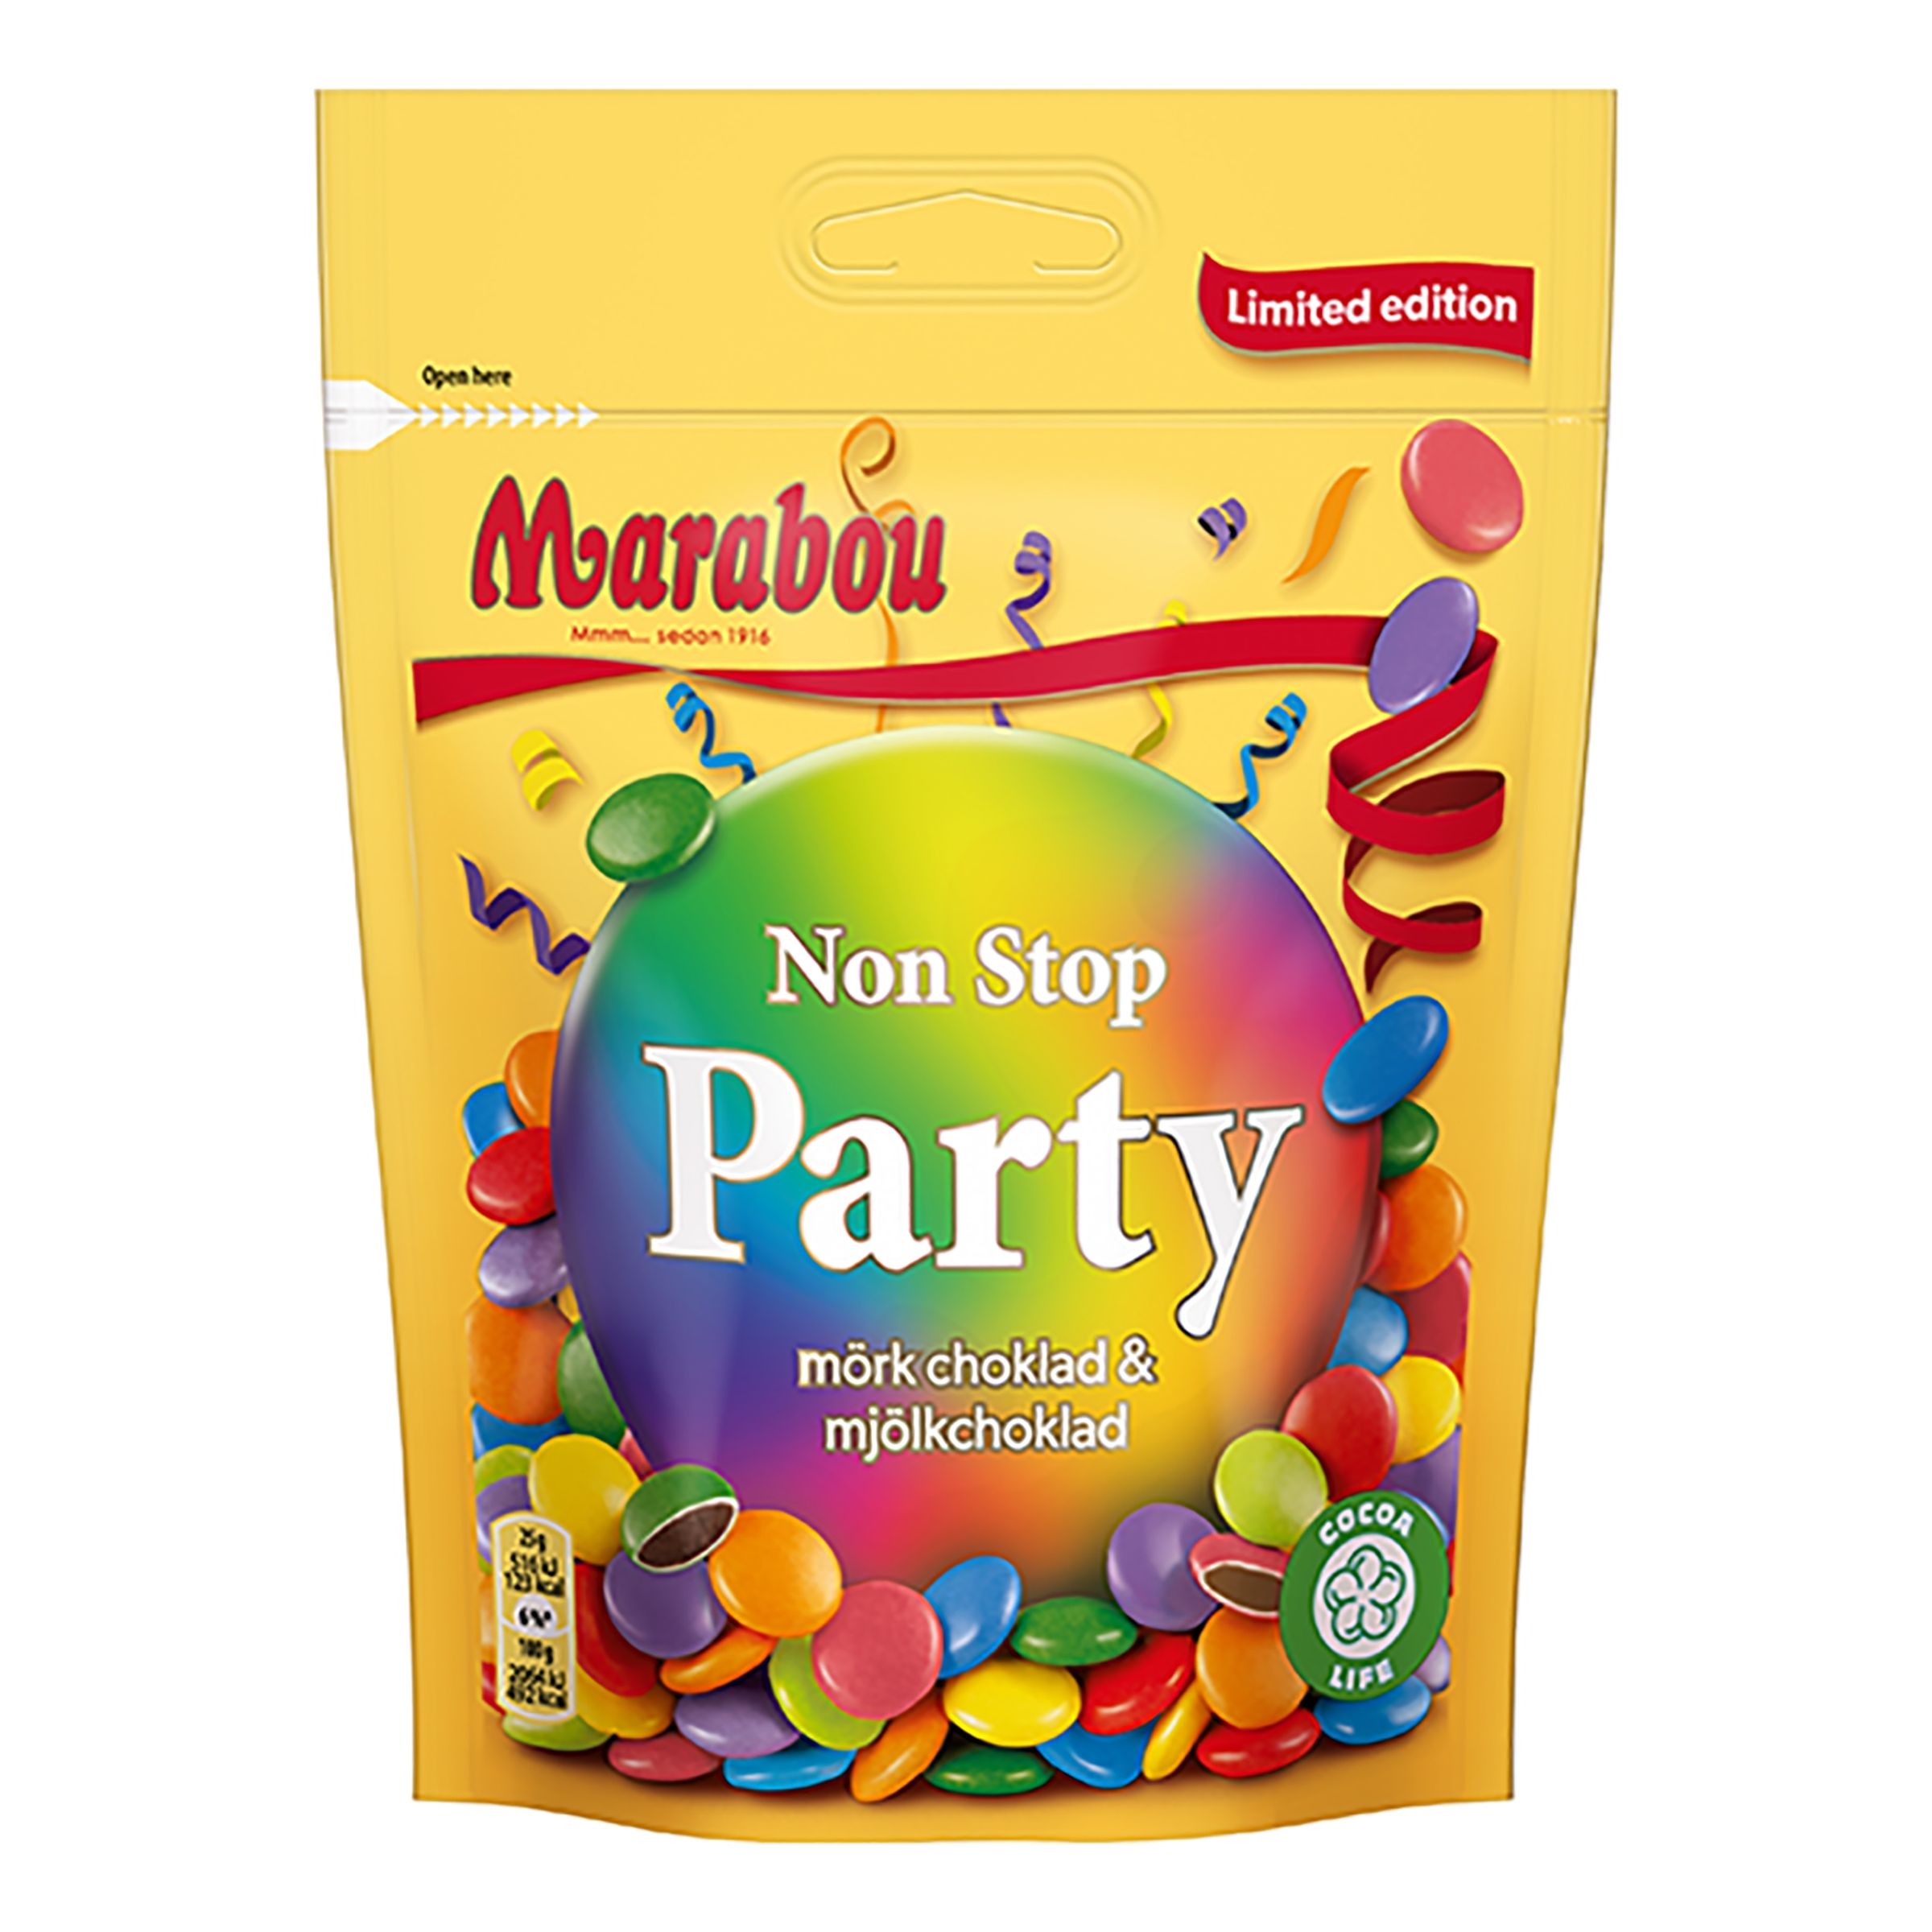 Marabou Non Stop Party Limited Edition - 225 gram